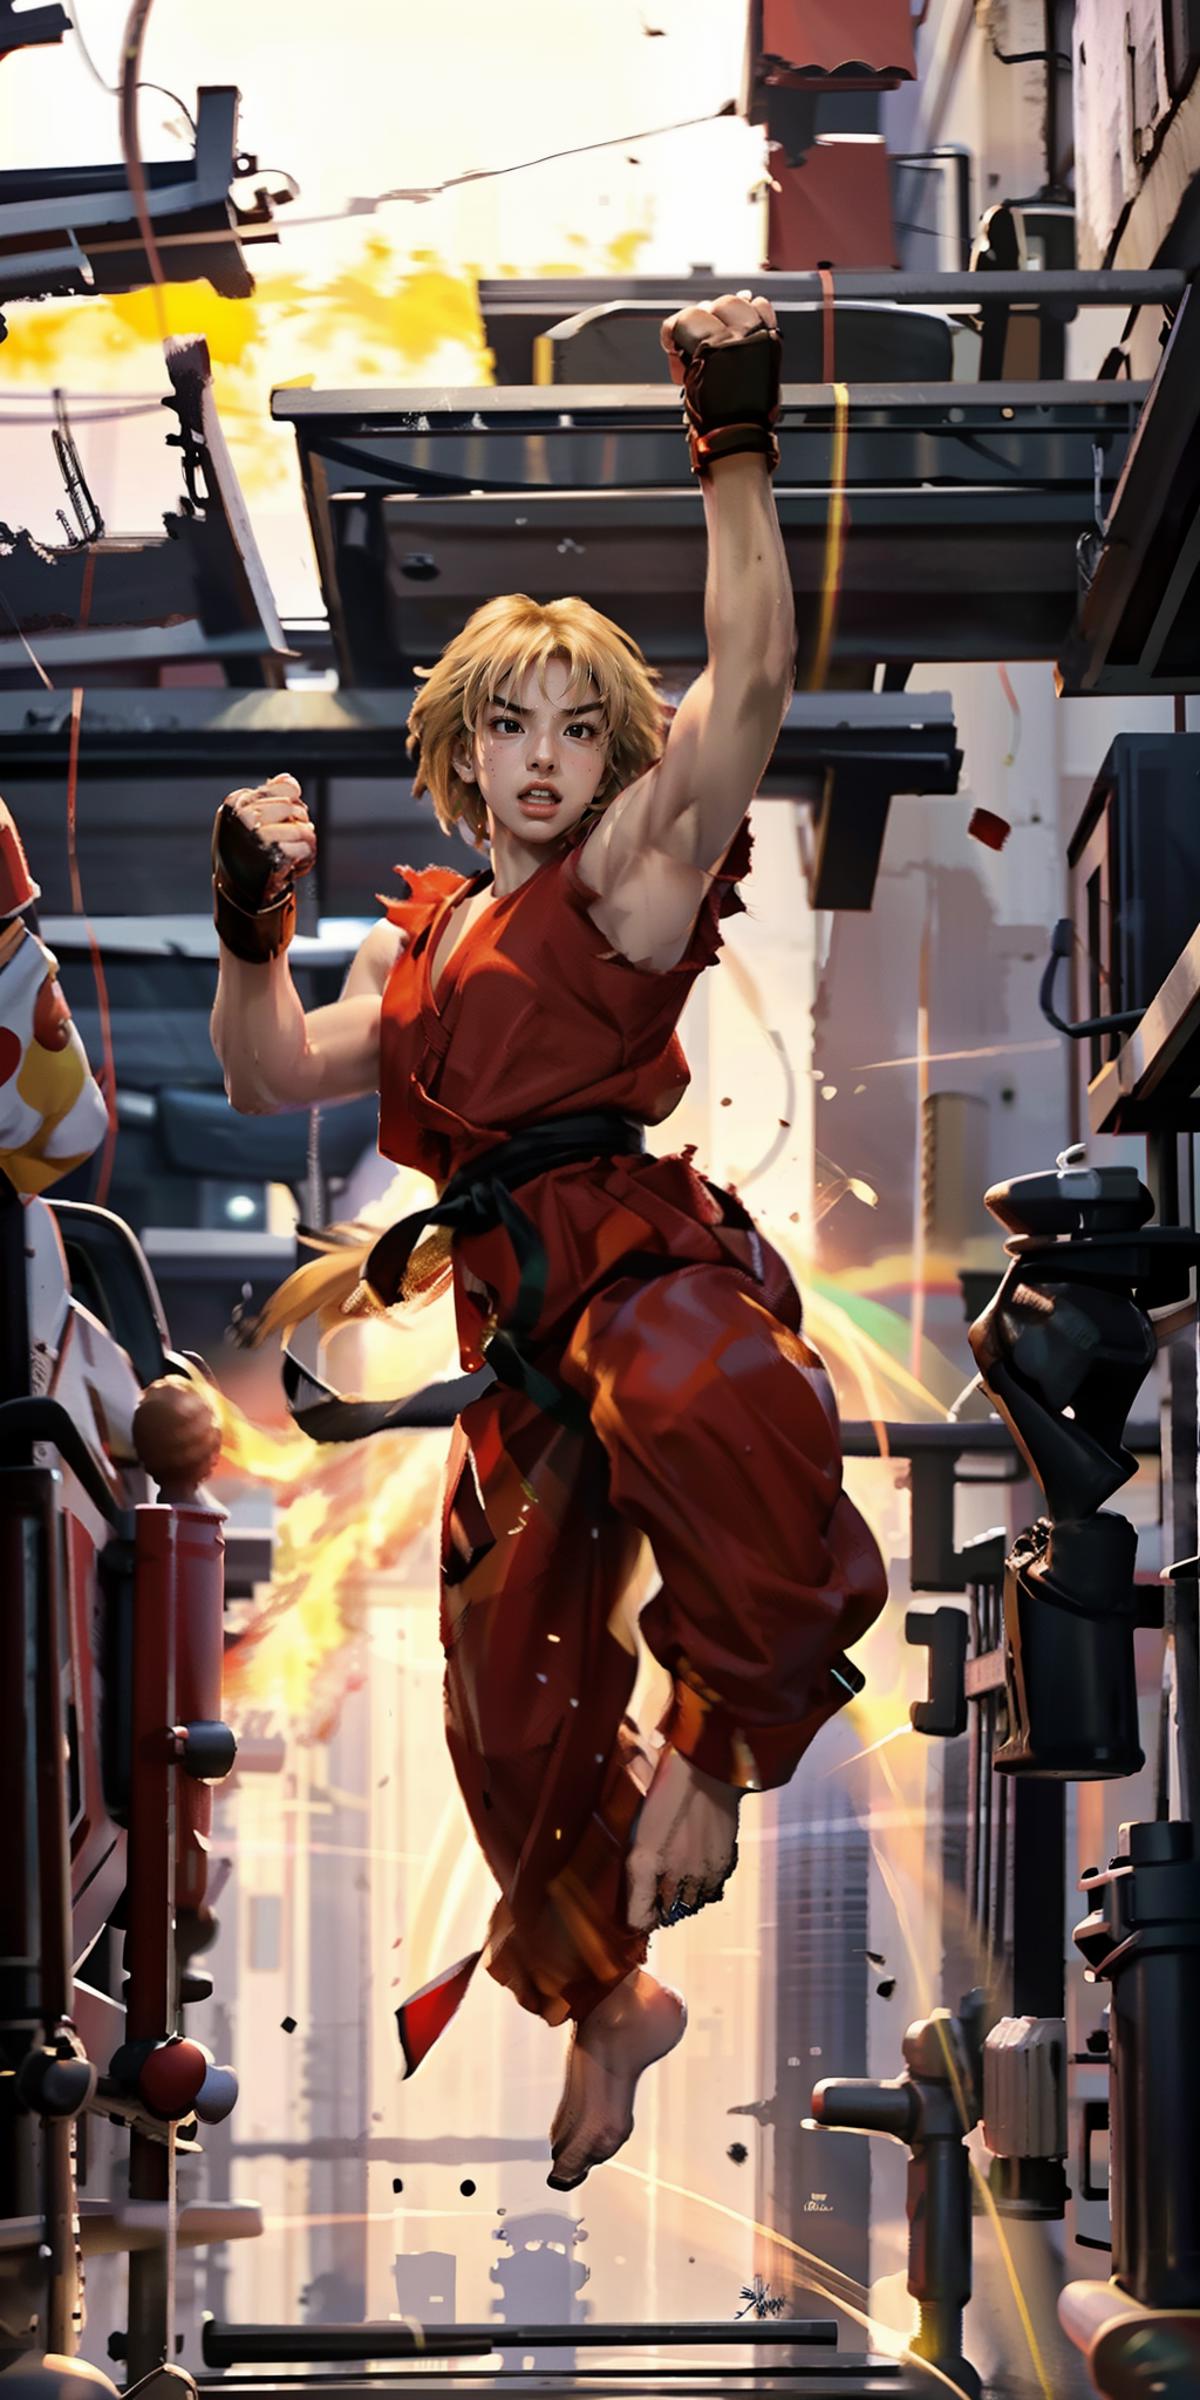 Ken Masters - Street Fighter Character image by xynix0522